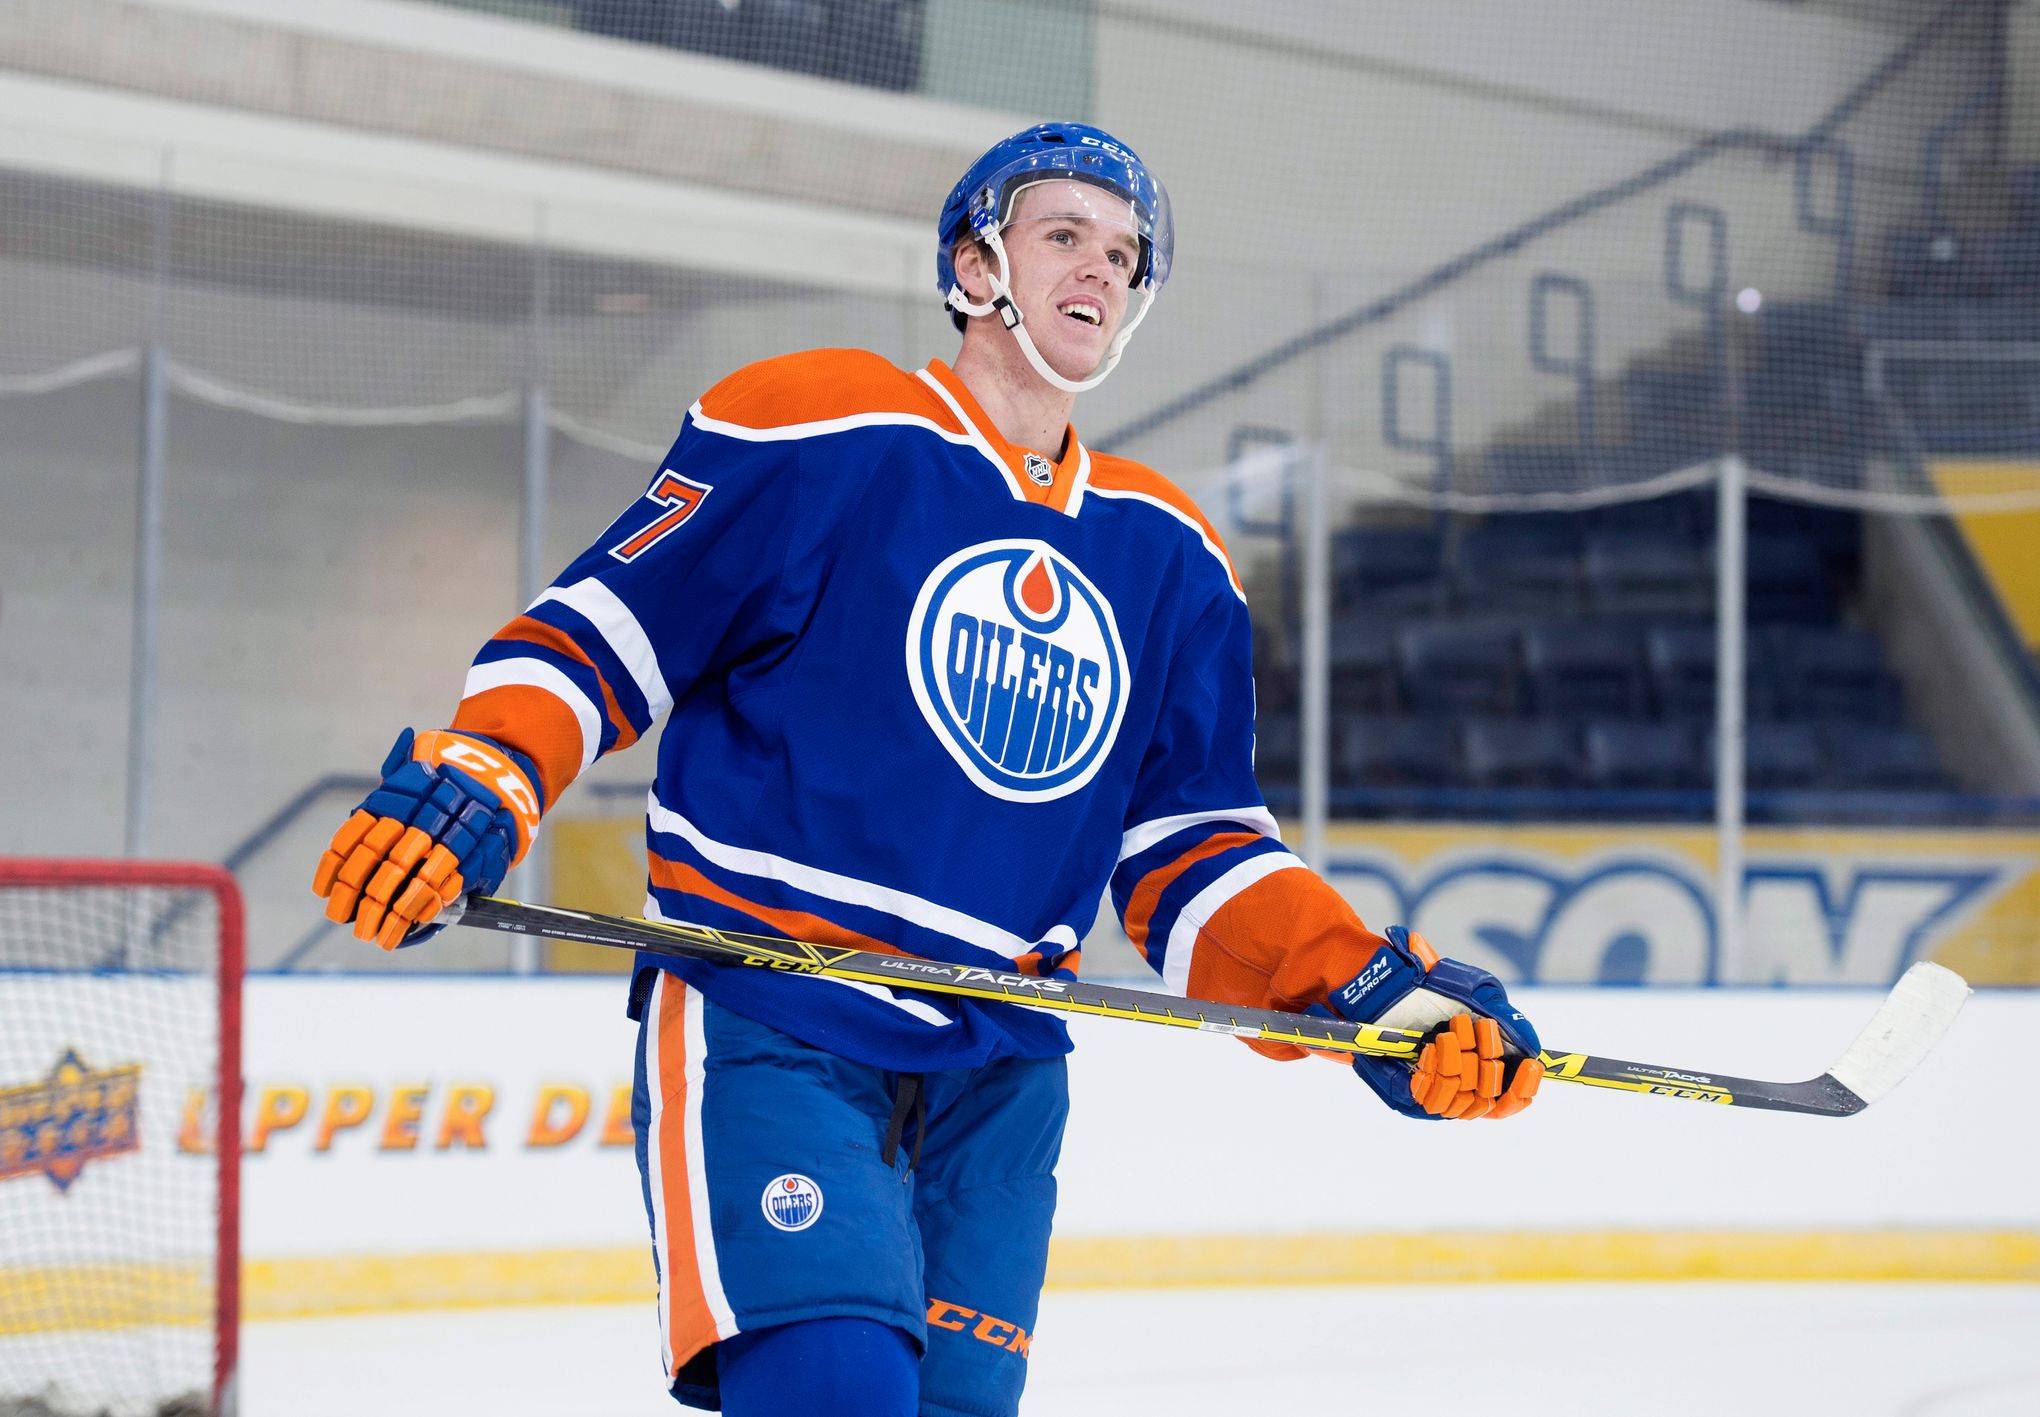 Connor McDavid is Set to Become NHL's Highest-Paid Player